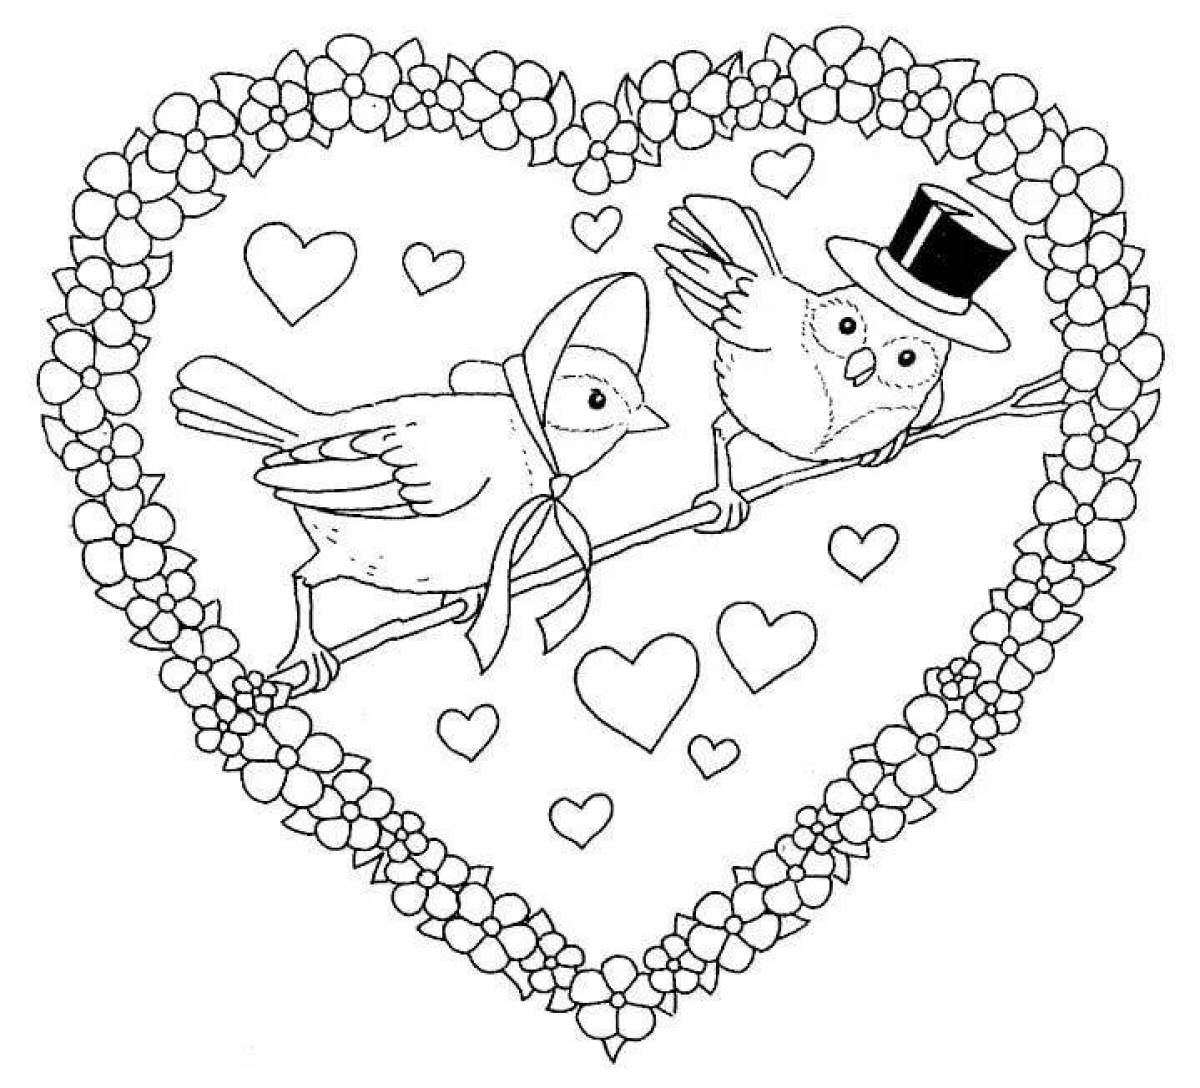 Lovely valentine's day coloring book